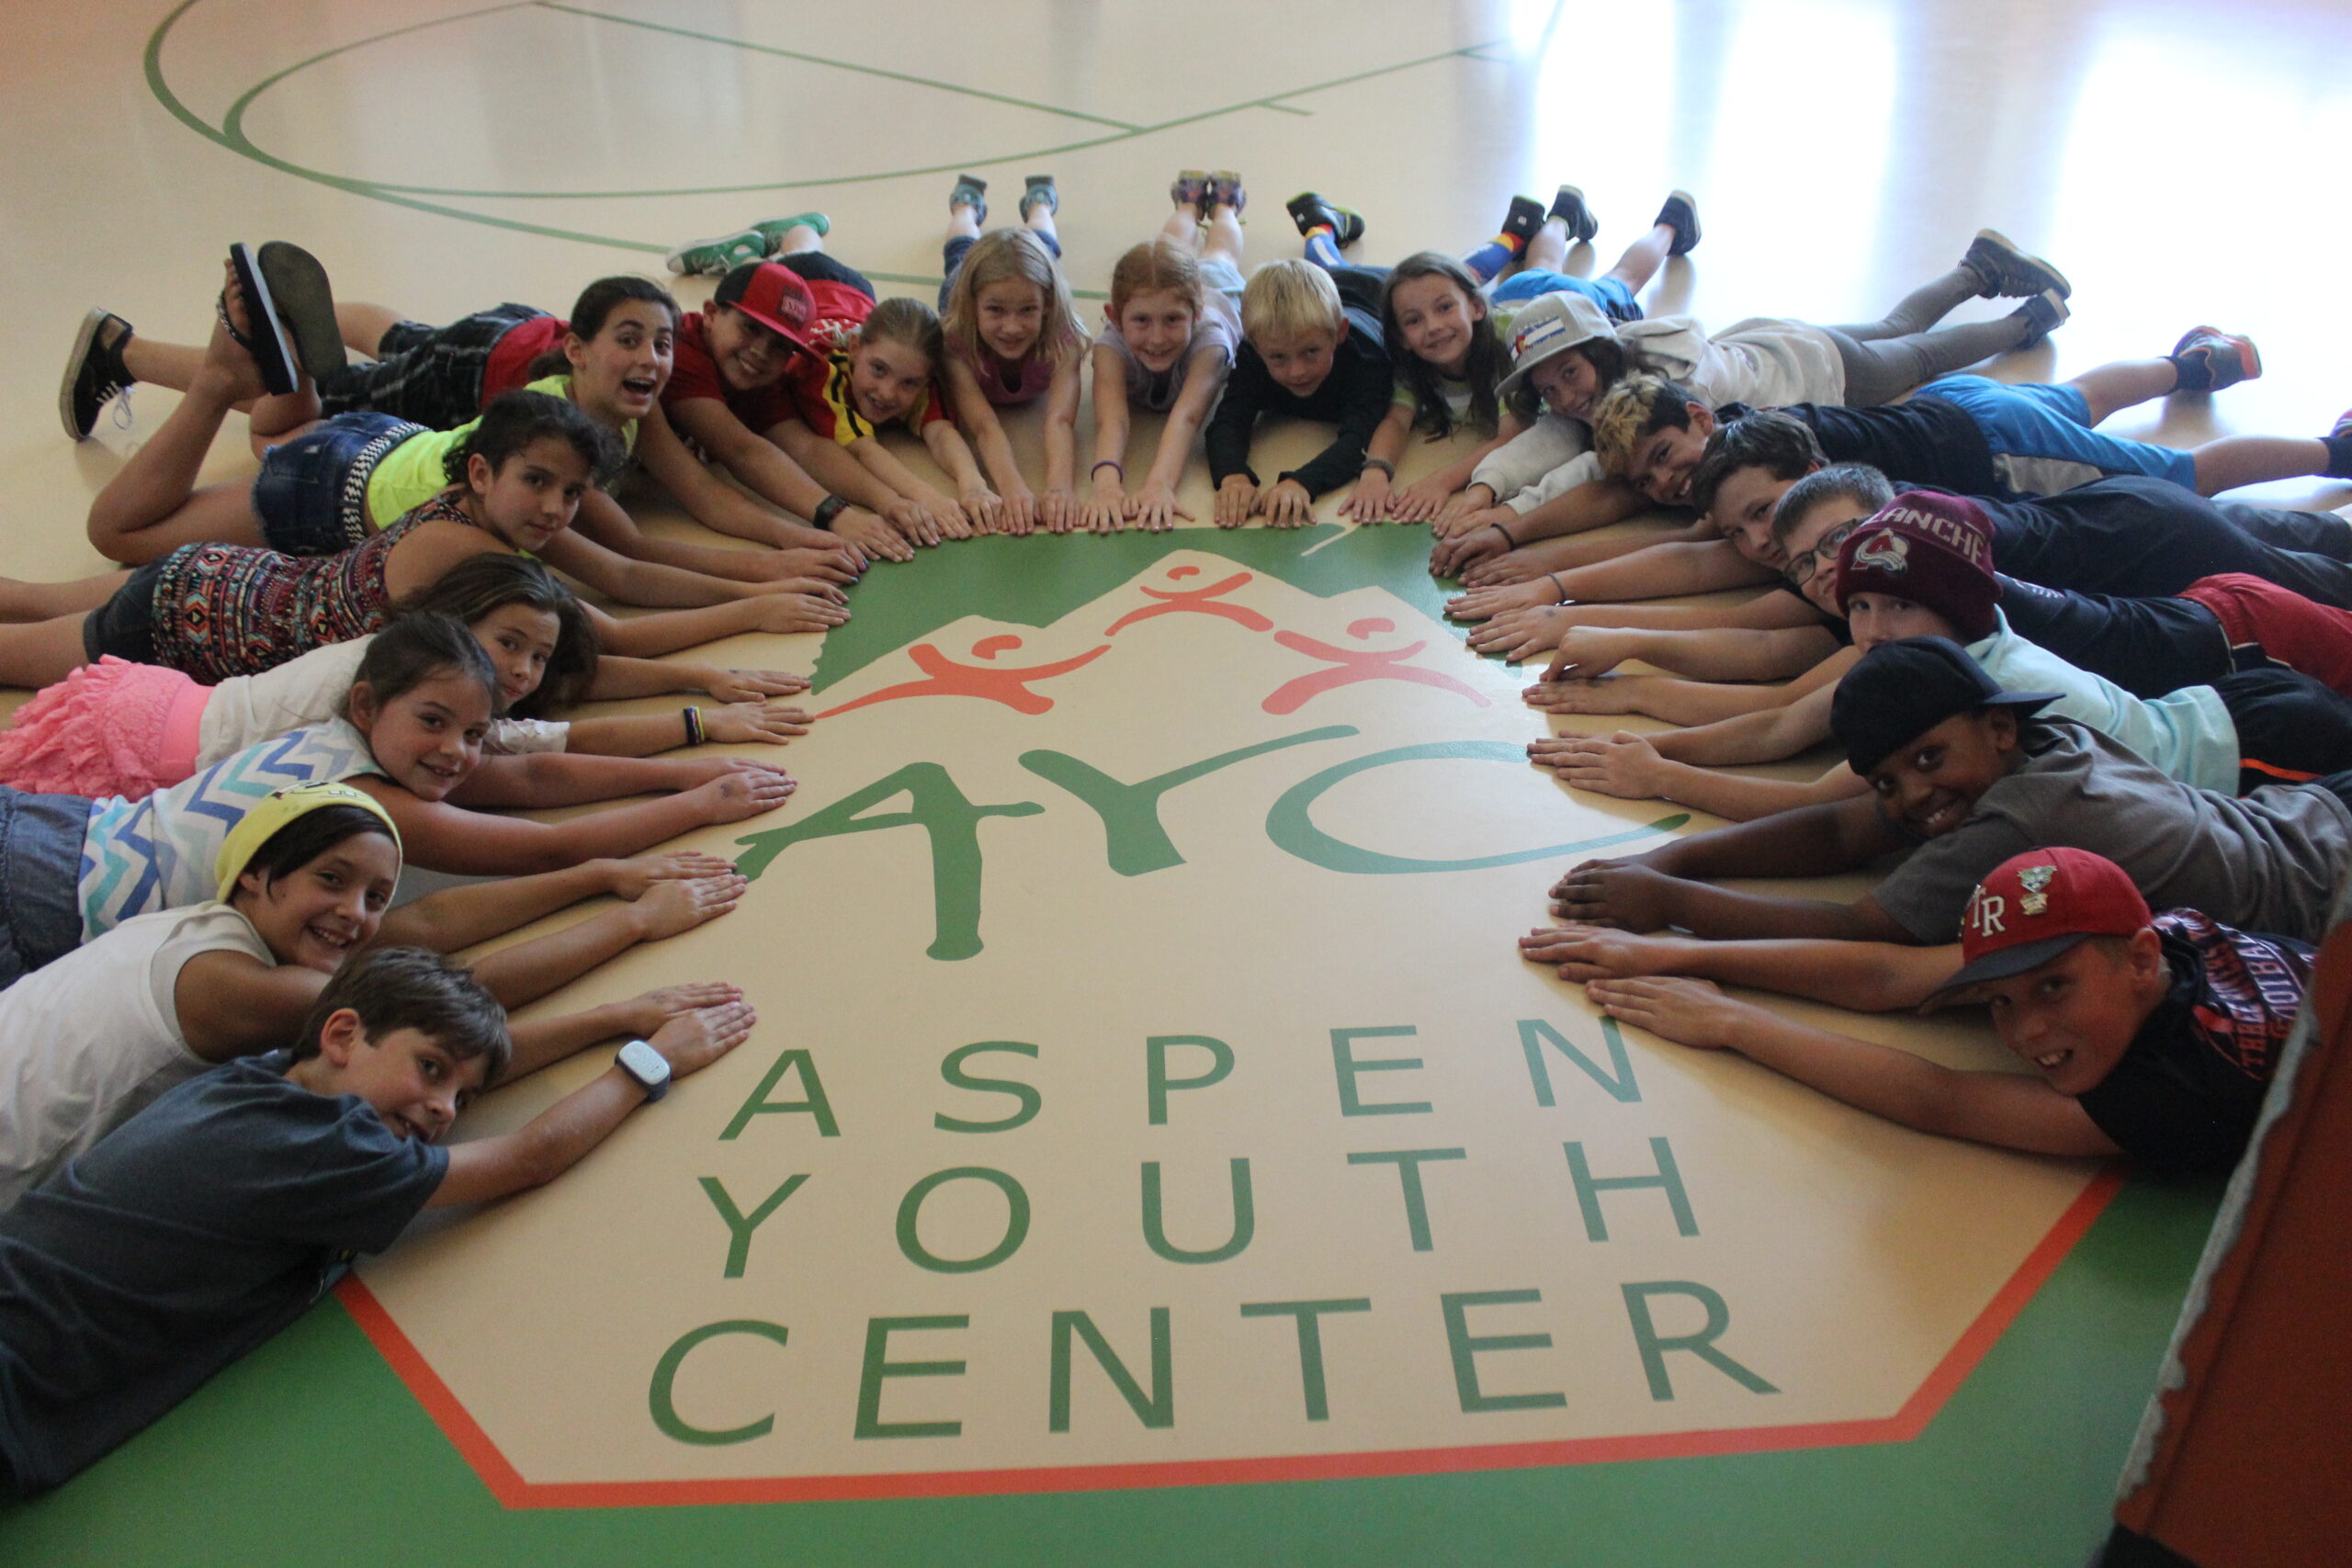 Kids at the Aspen Youth Center located in Aspen Snowmass, CO.